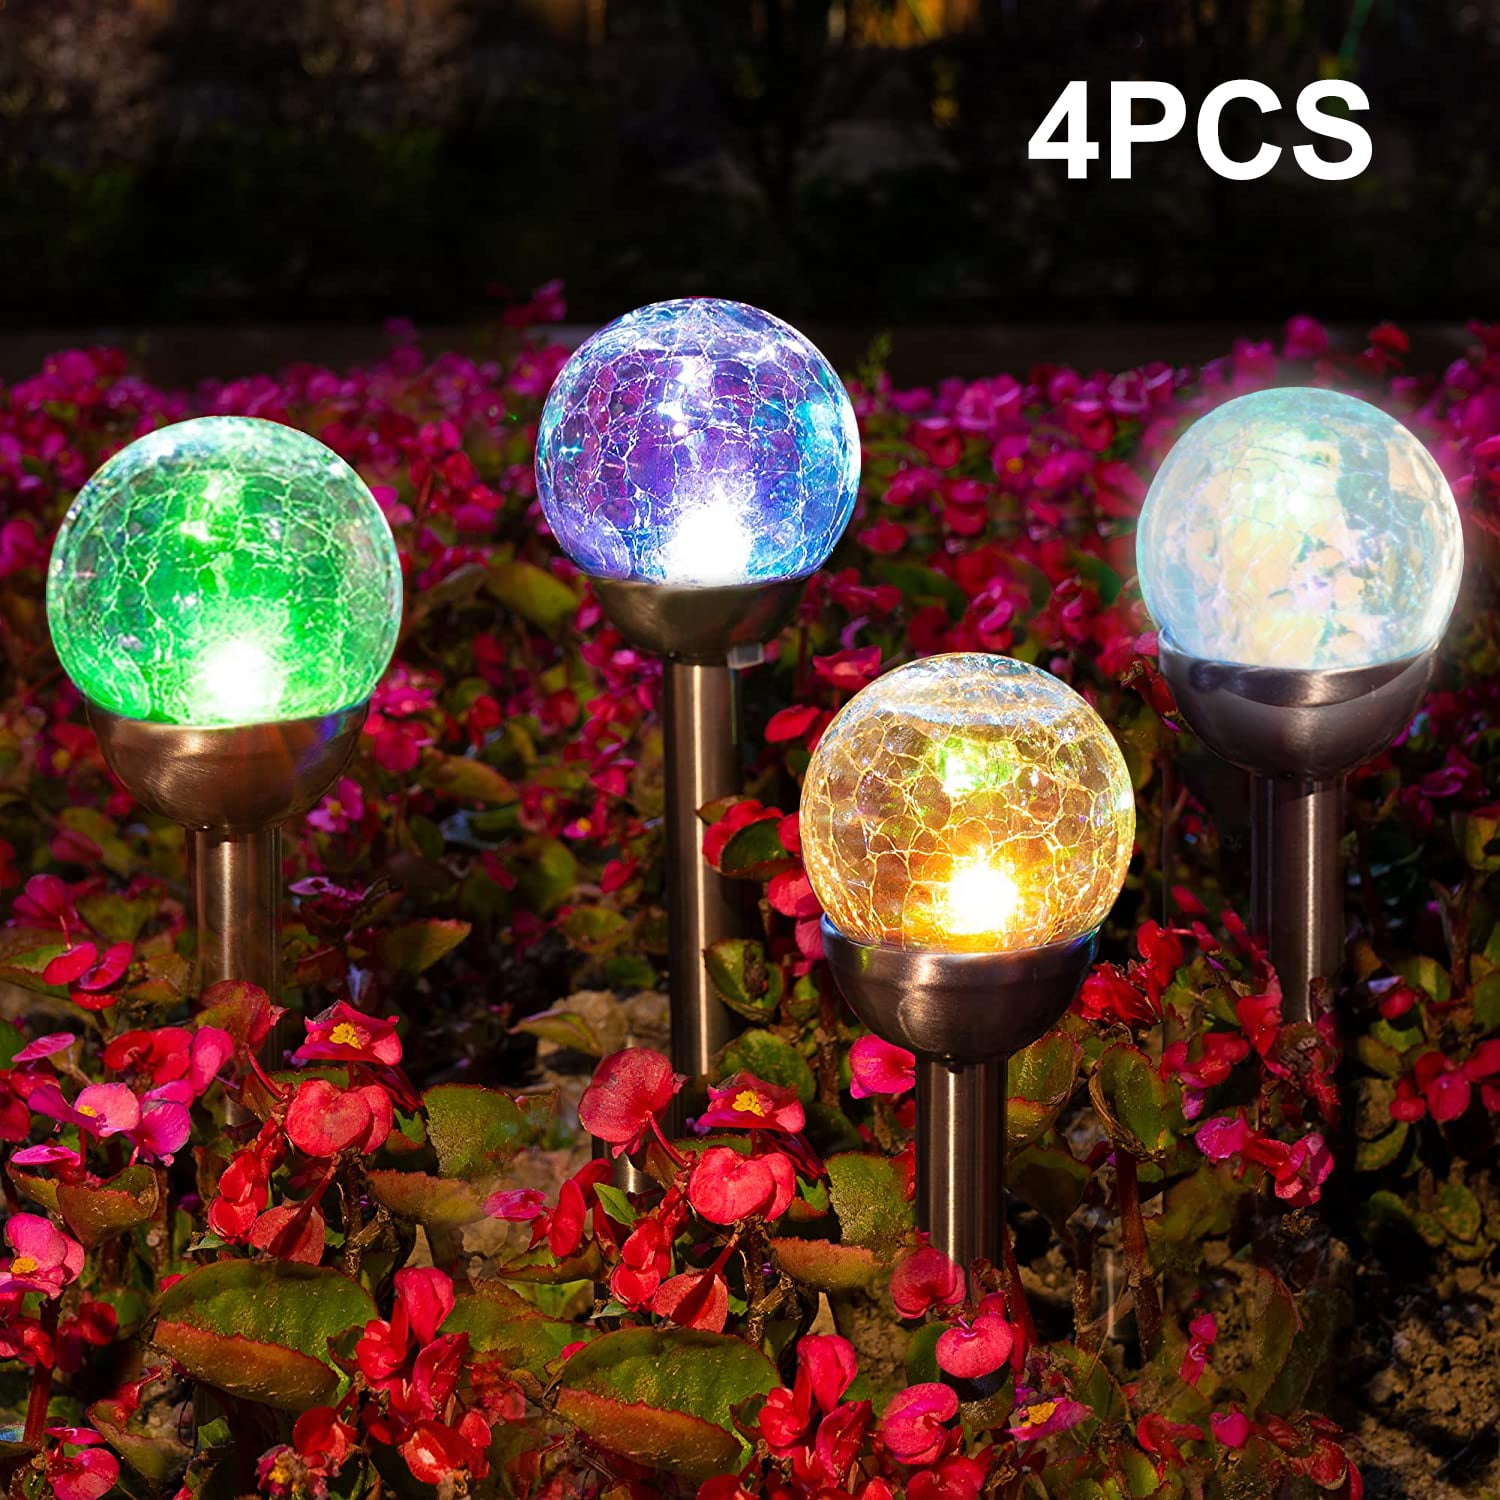 Details about   Sunflower Shaped LED Solar Powered Lawn Lamps Waterproof Outdoor Garden Lights 